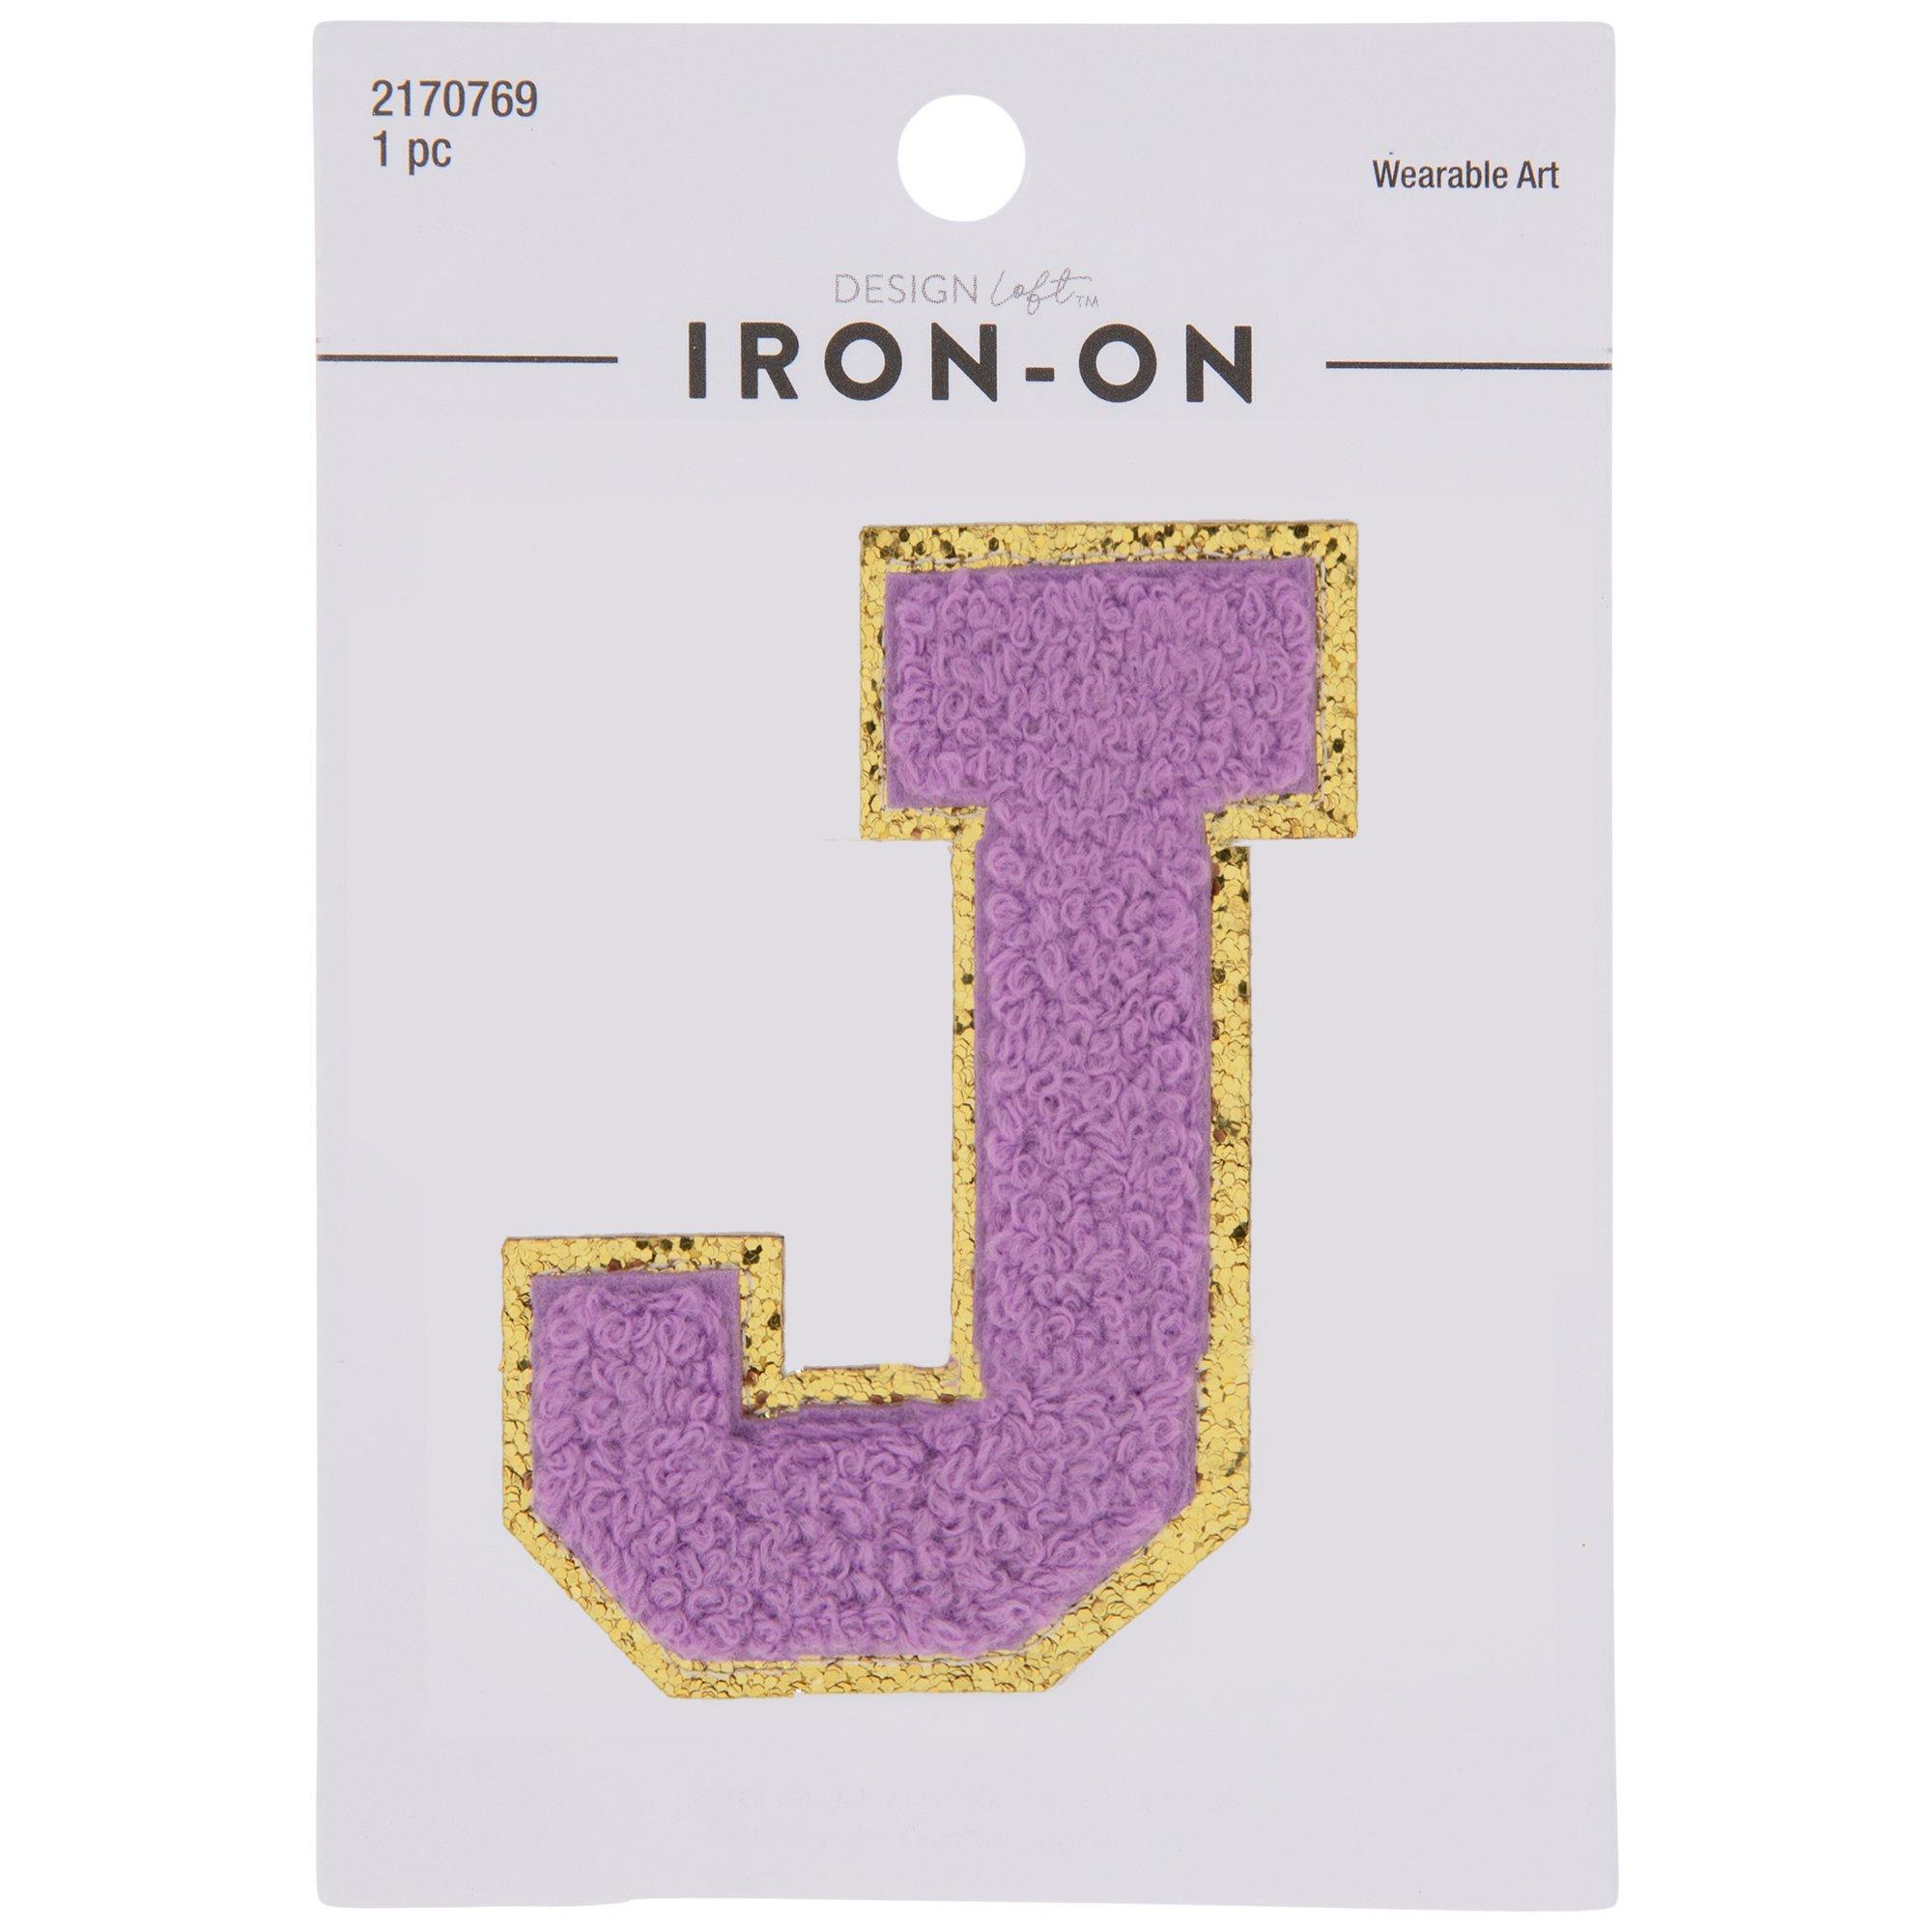 Heart Chenille Iron-On Patches, Hobby Lobby